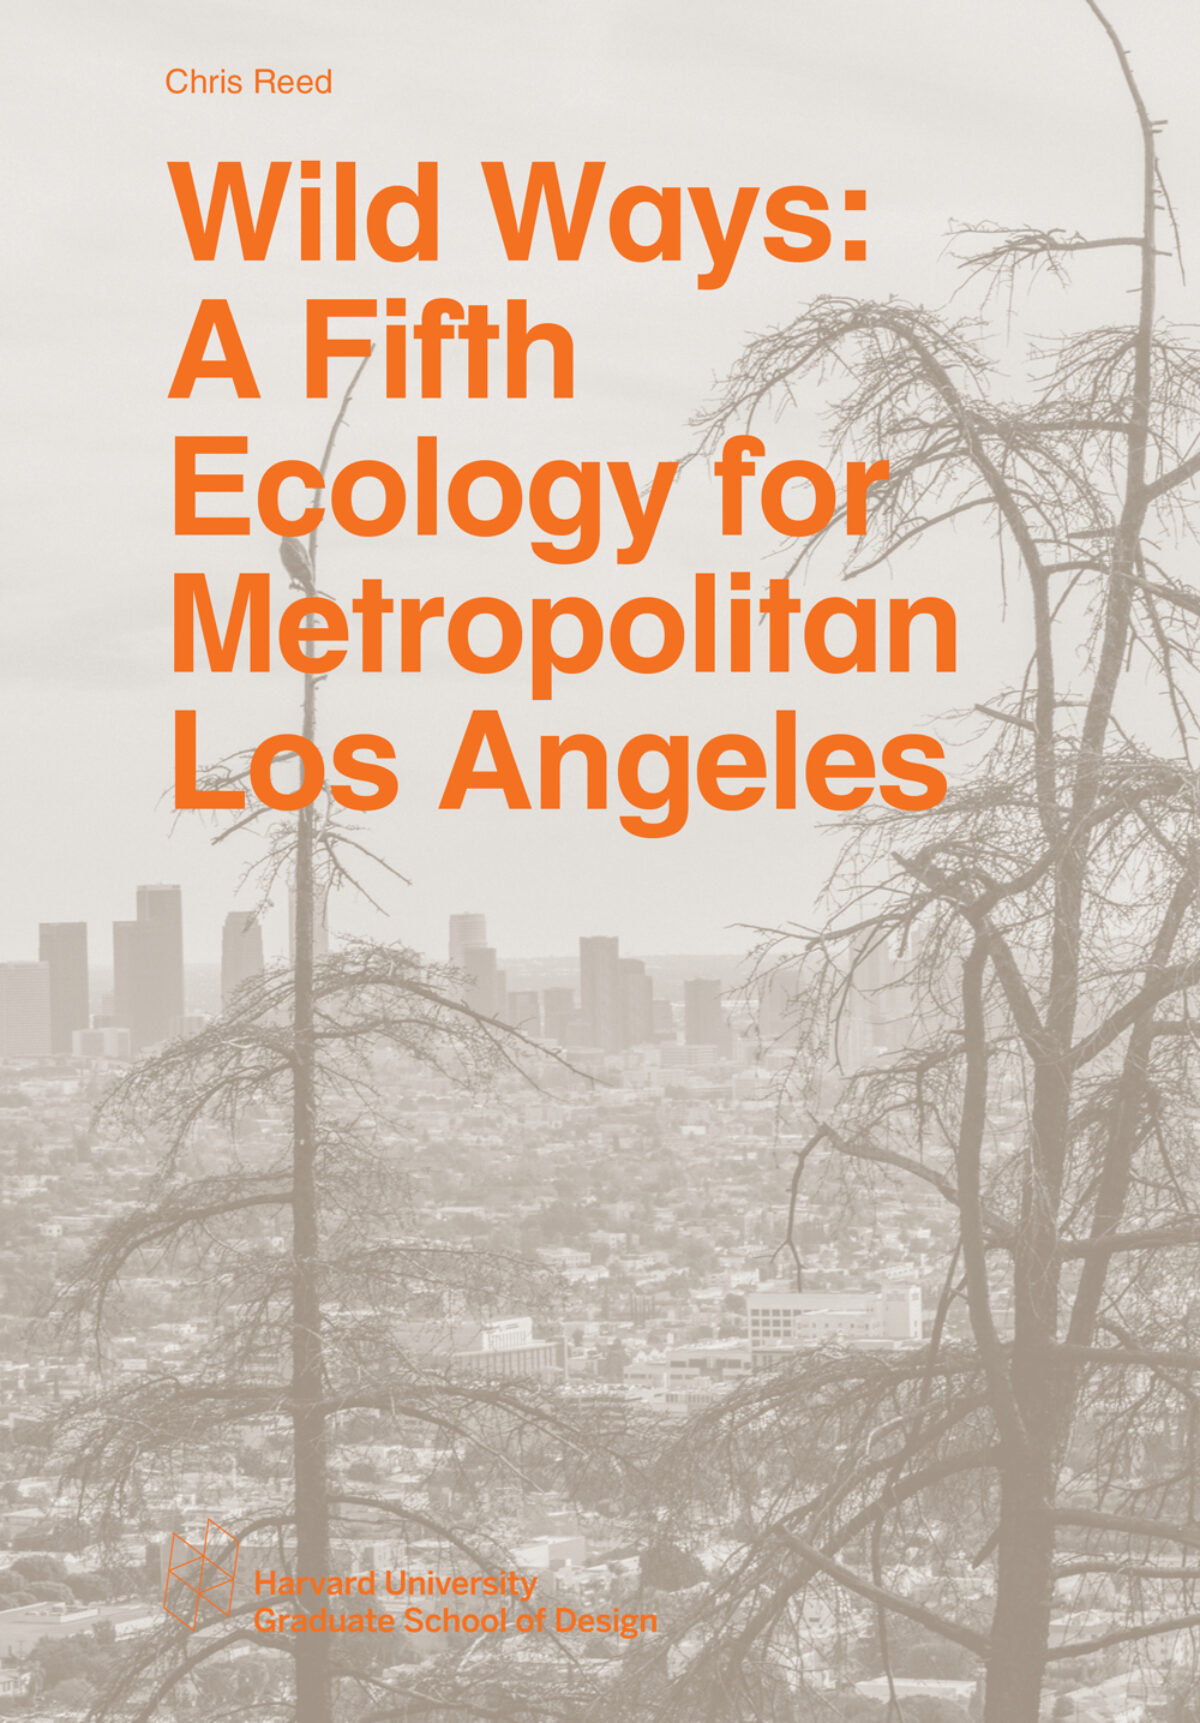 Orange cover text on top of a faded skyline of Los Angeles with trees in the foreground.